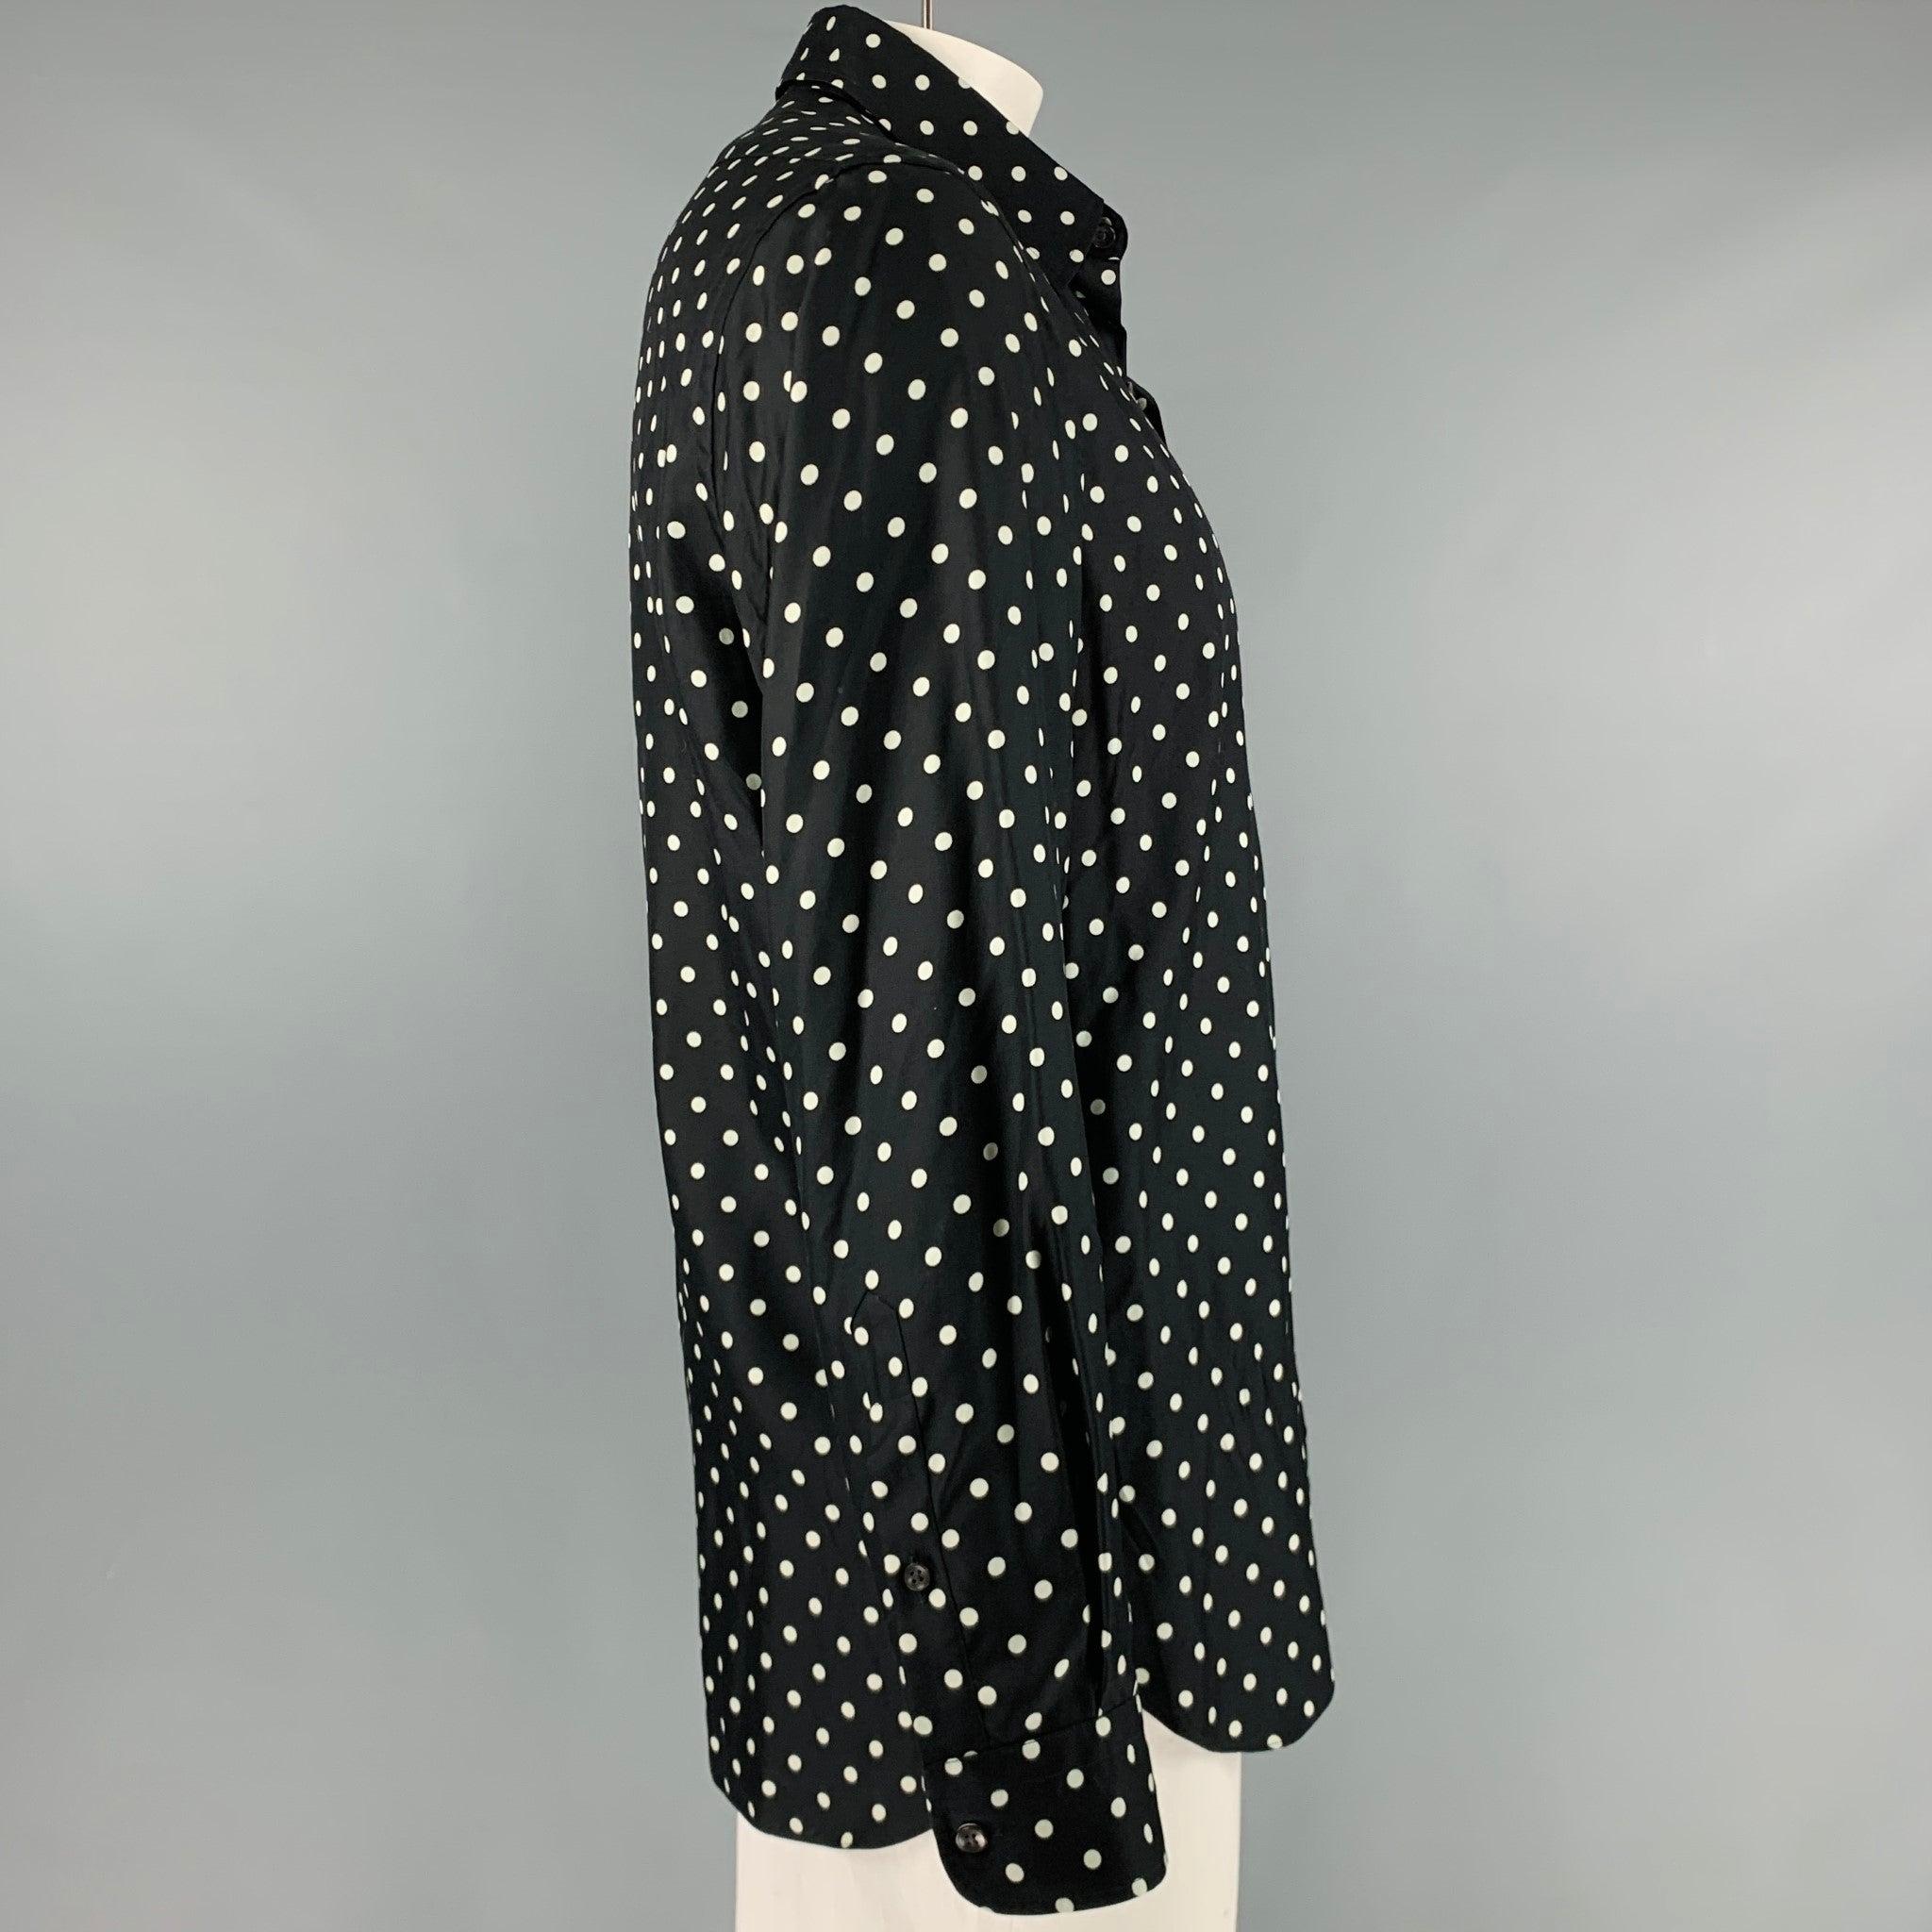 RALPH LAUREN PURPLE LABEL long sleeve shirt
in a black silk fabric featuring white polka dot pattern, spread collar, and button closure. Made in Italy.Very Good Pre-Owned Condition. Minor mark. 

Marked:   L 

Measurements: 
 
Shoulder: 19 inches